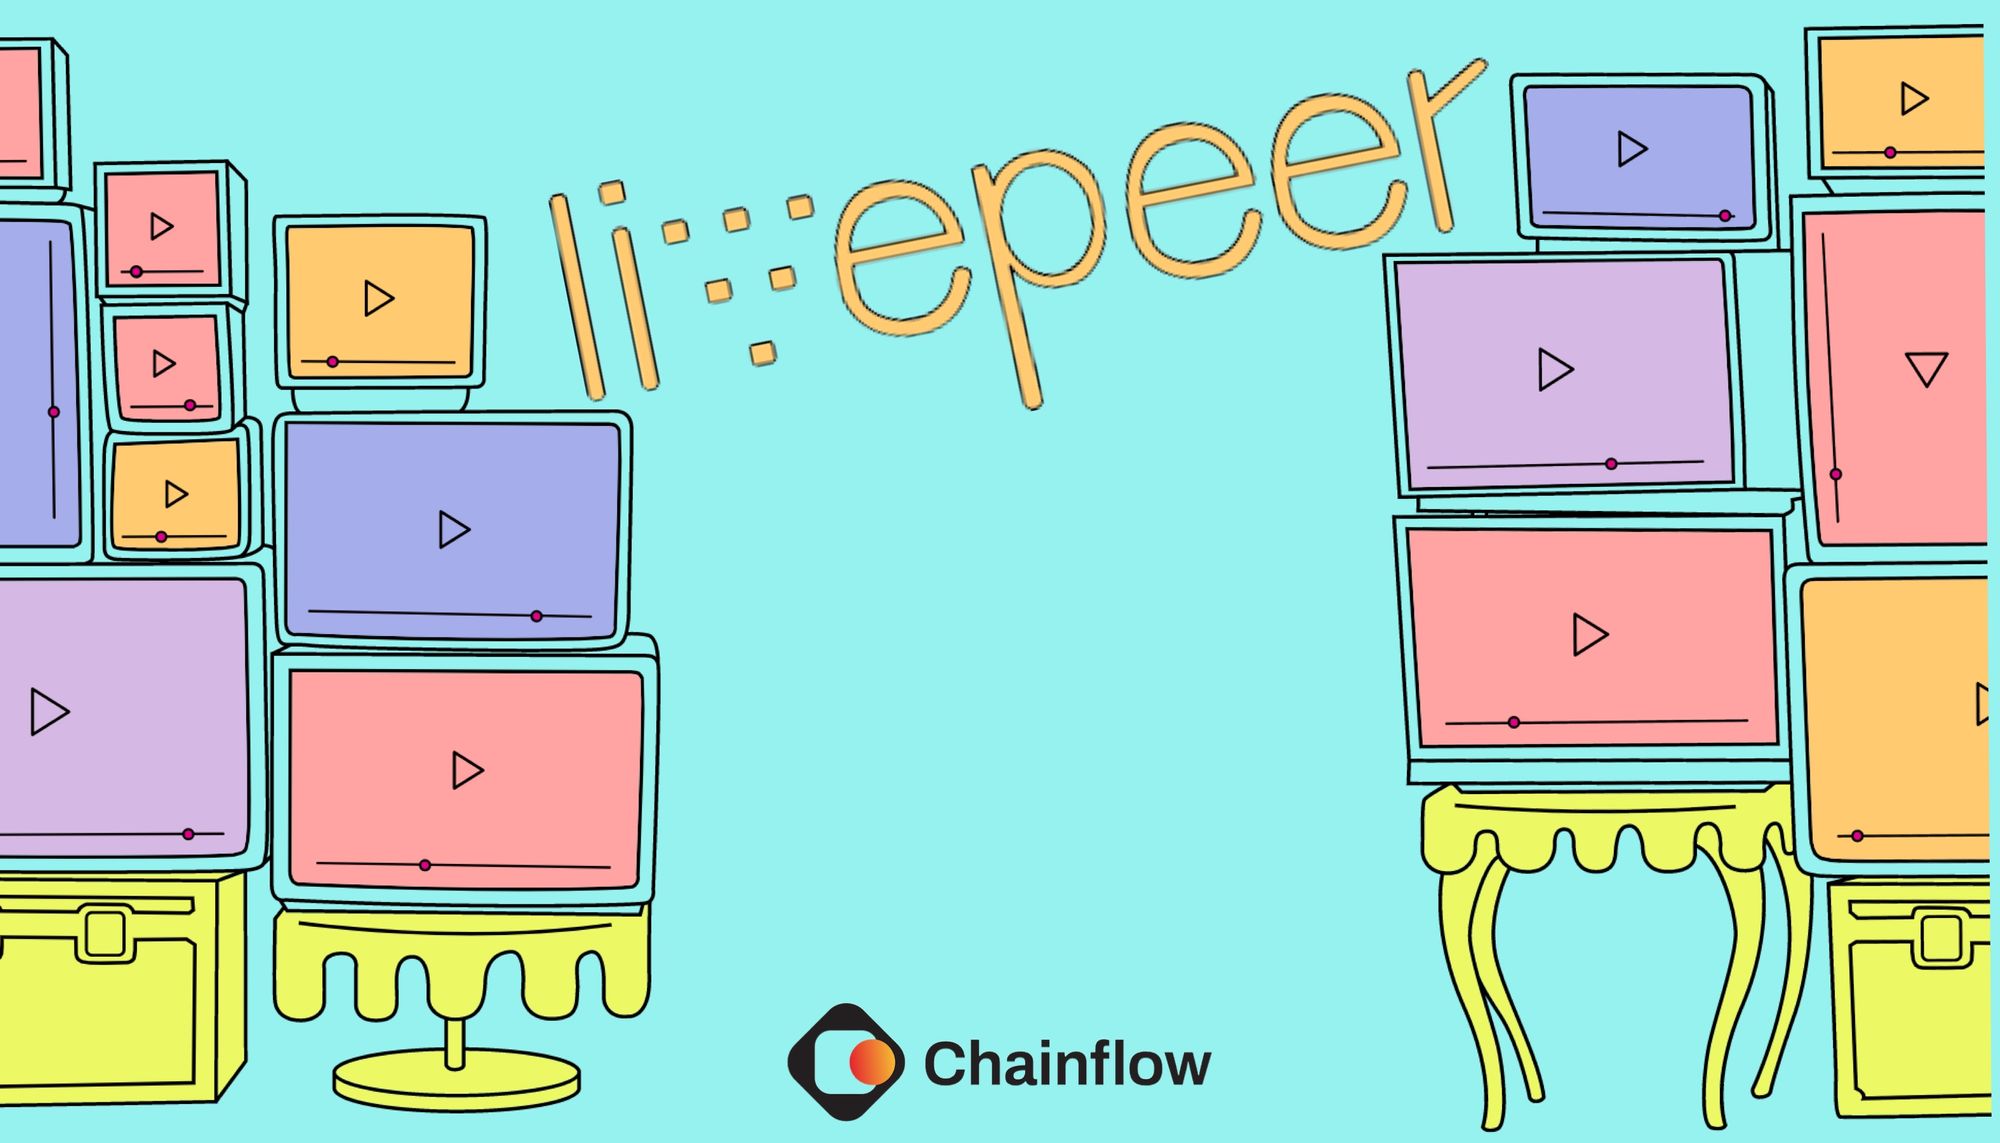 How to Stake Livepeer LPT Tokens? Step-by-step Guide